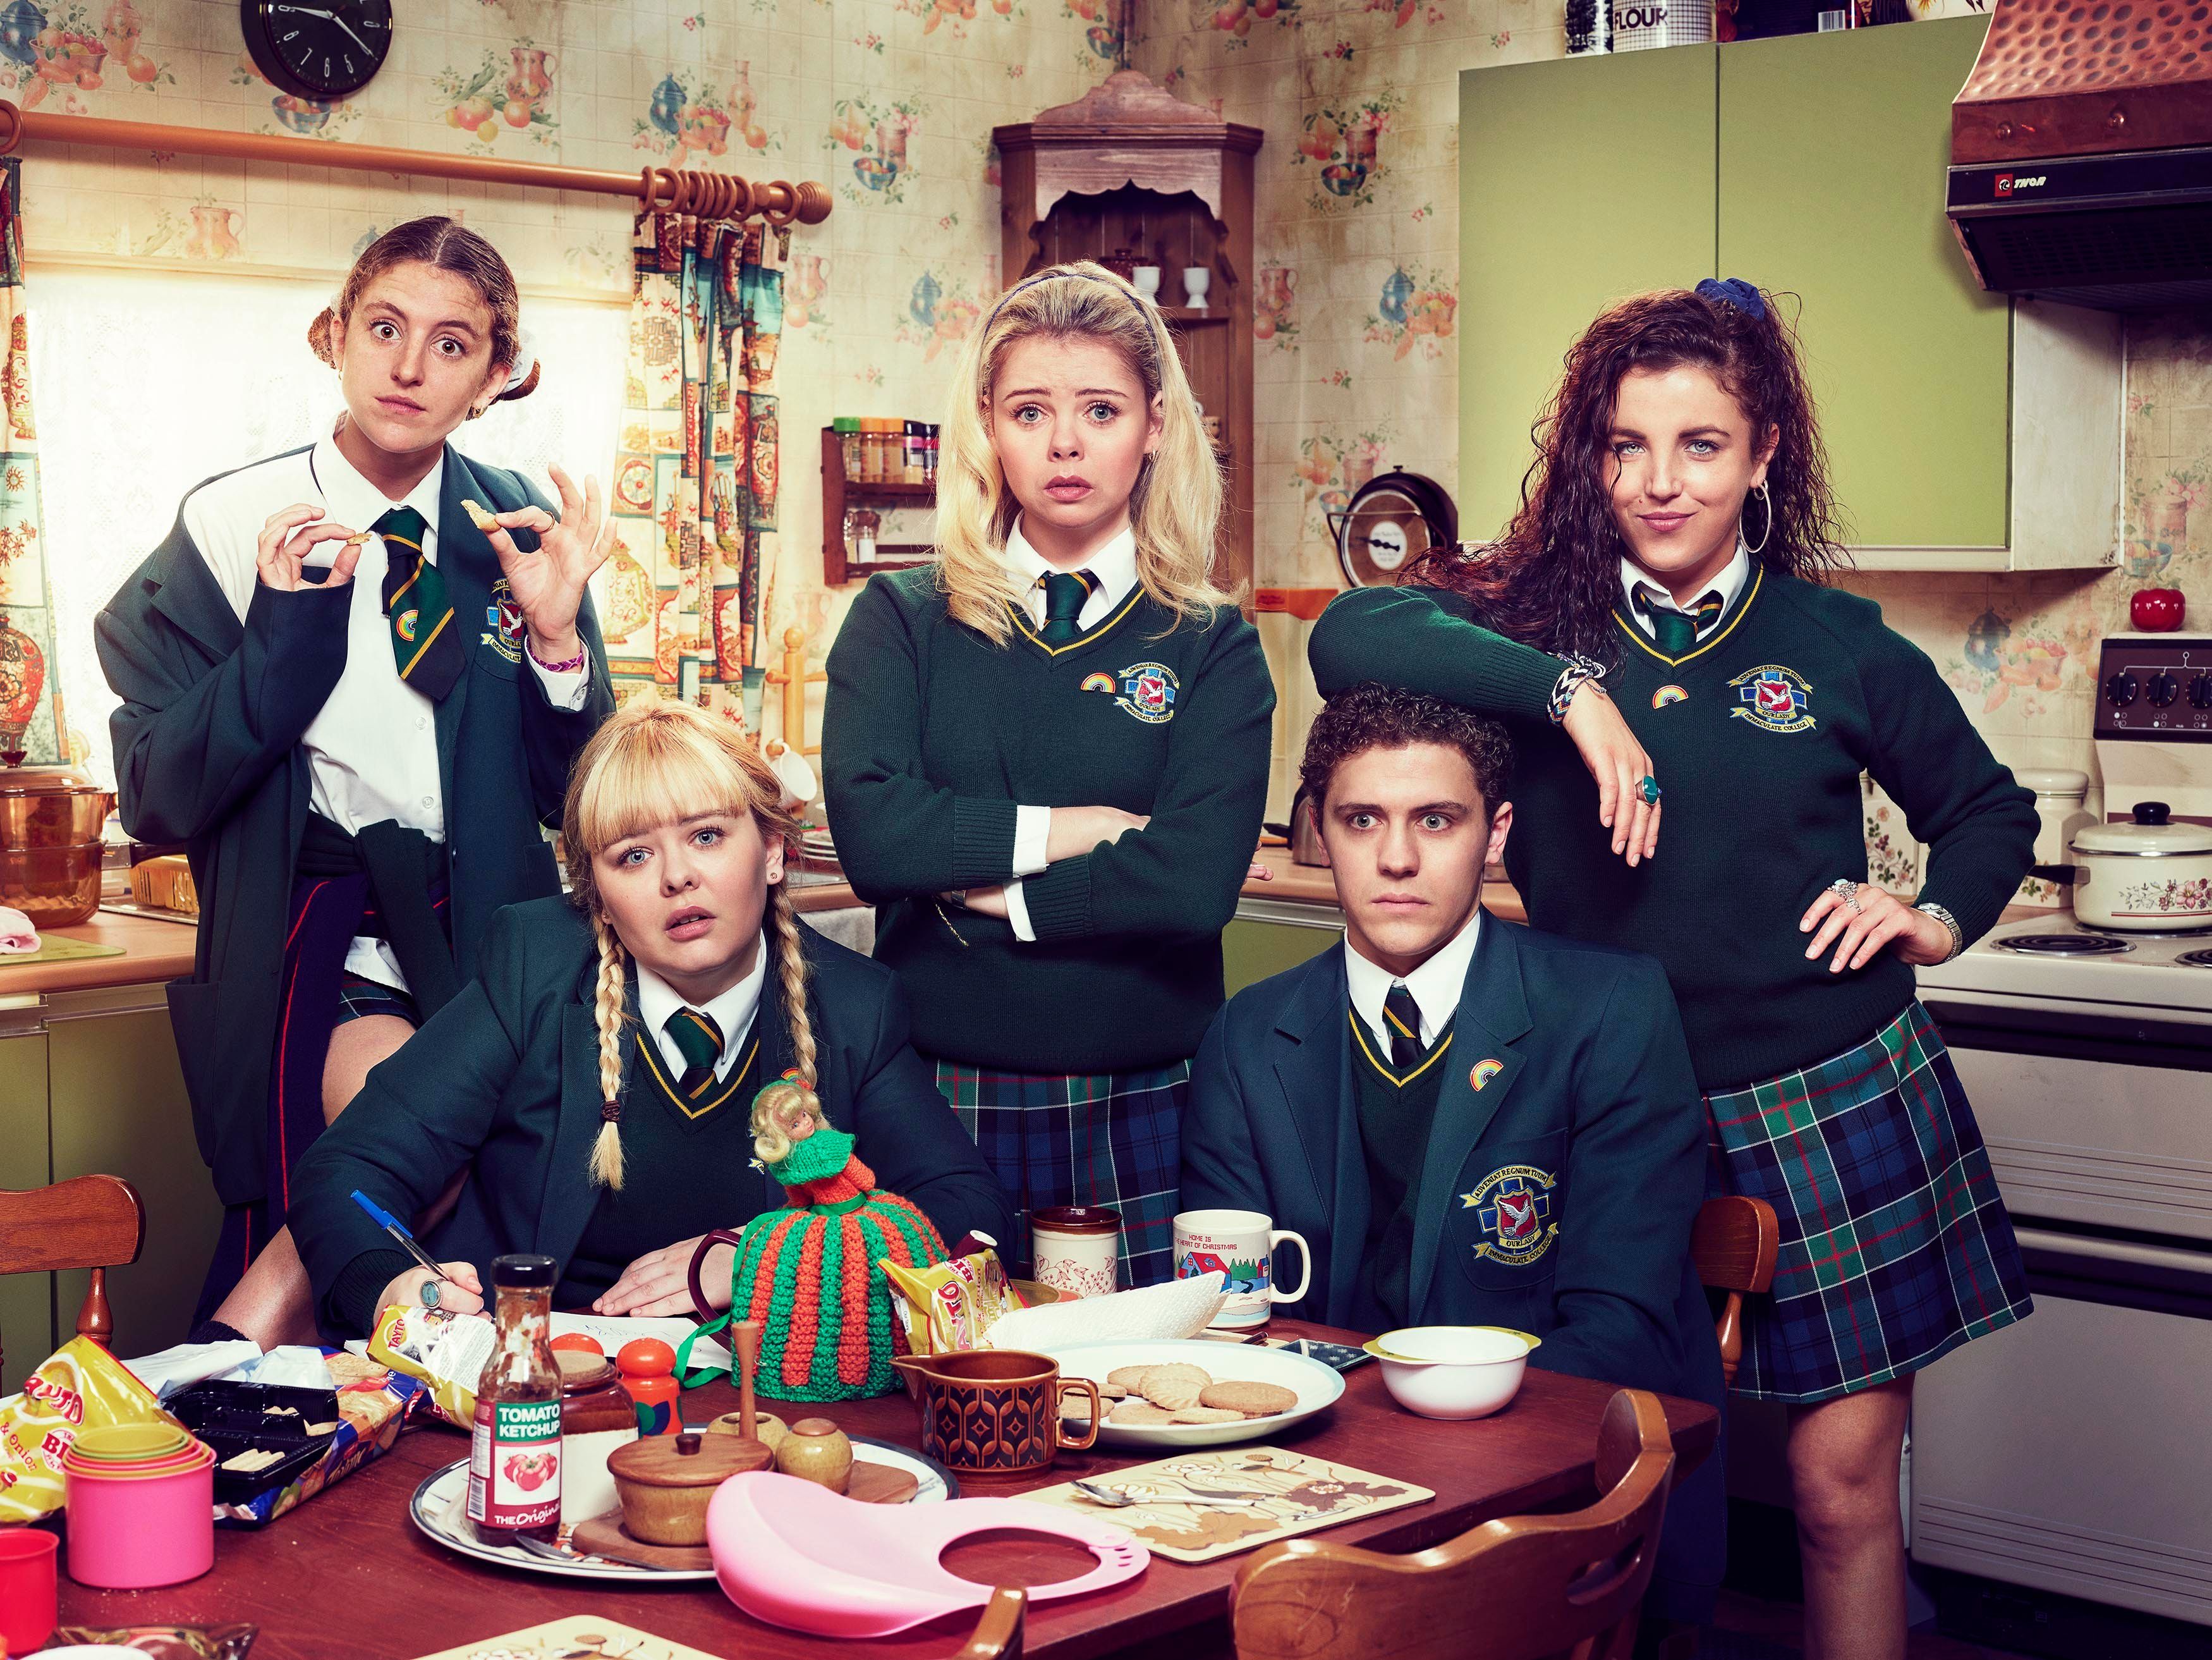 Nicola with her Derry Girls co-stars